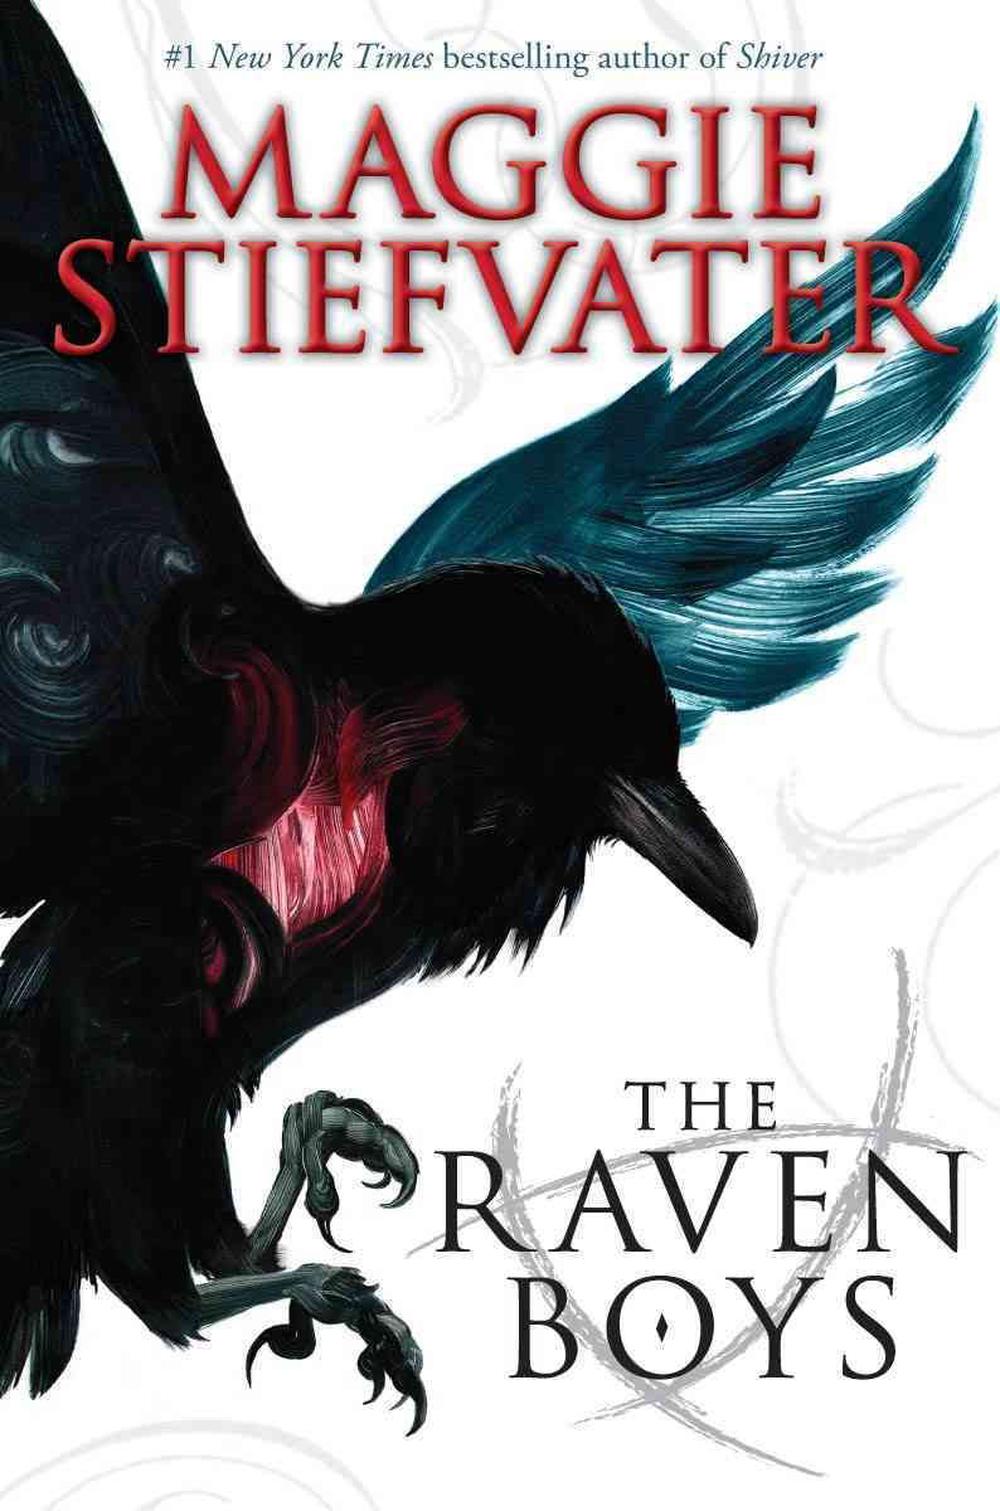 Boys　online　Hardcover,　The　9780545424929　Stiefvater,　The　Maggie　at　Raven　Nile　by　Buy